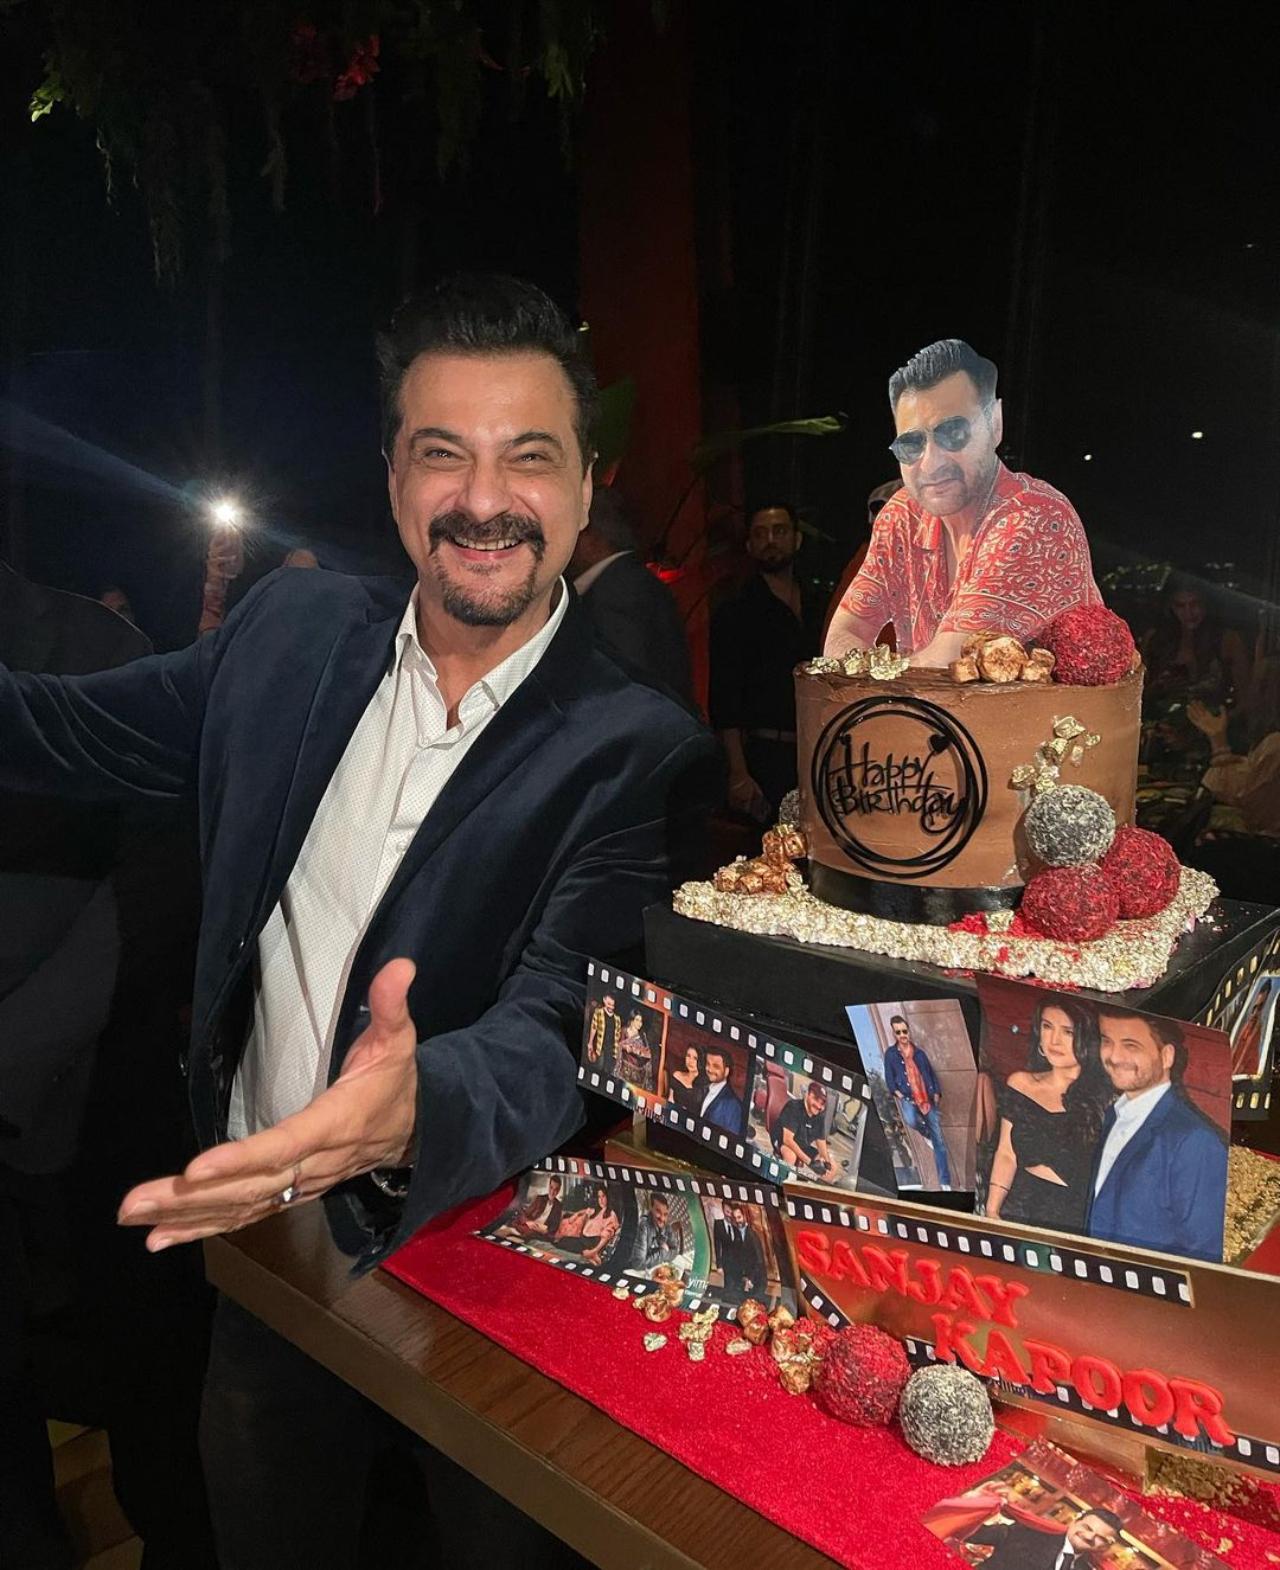 Sanjay was seen posing with his yummy and designed cake with family pictures